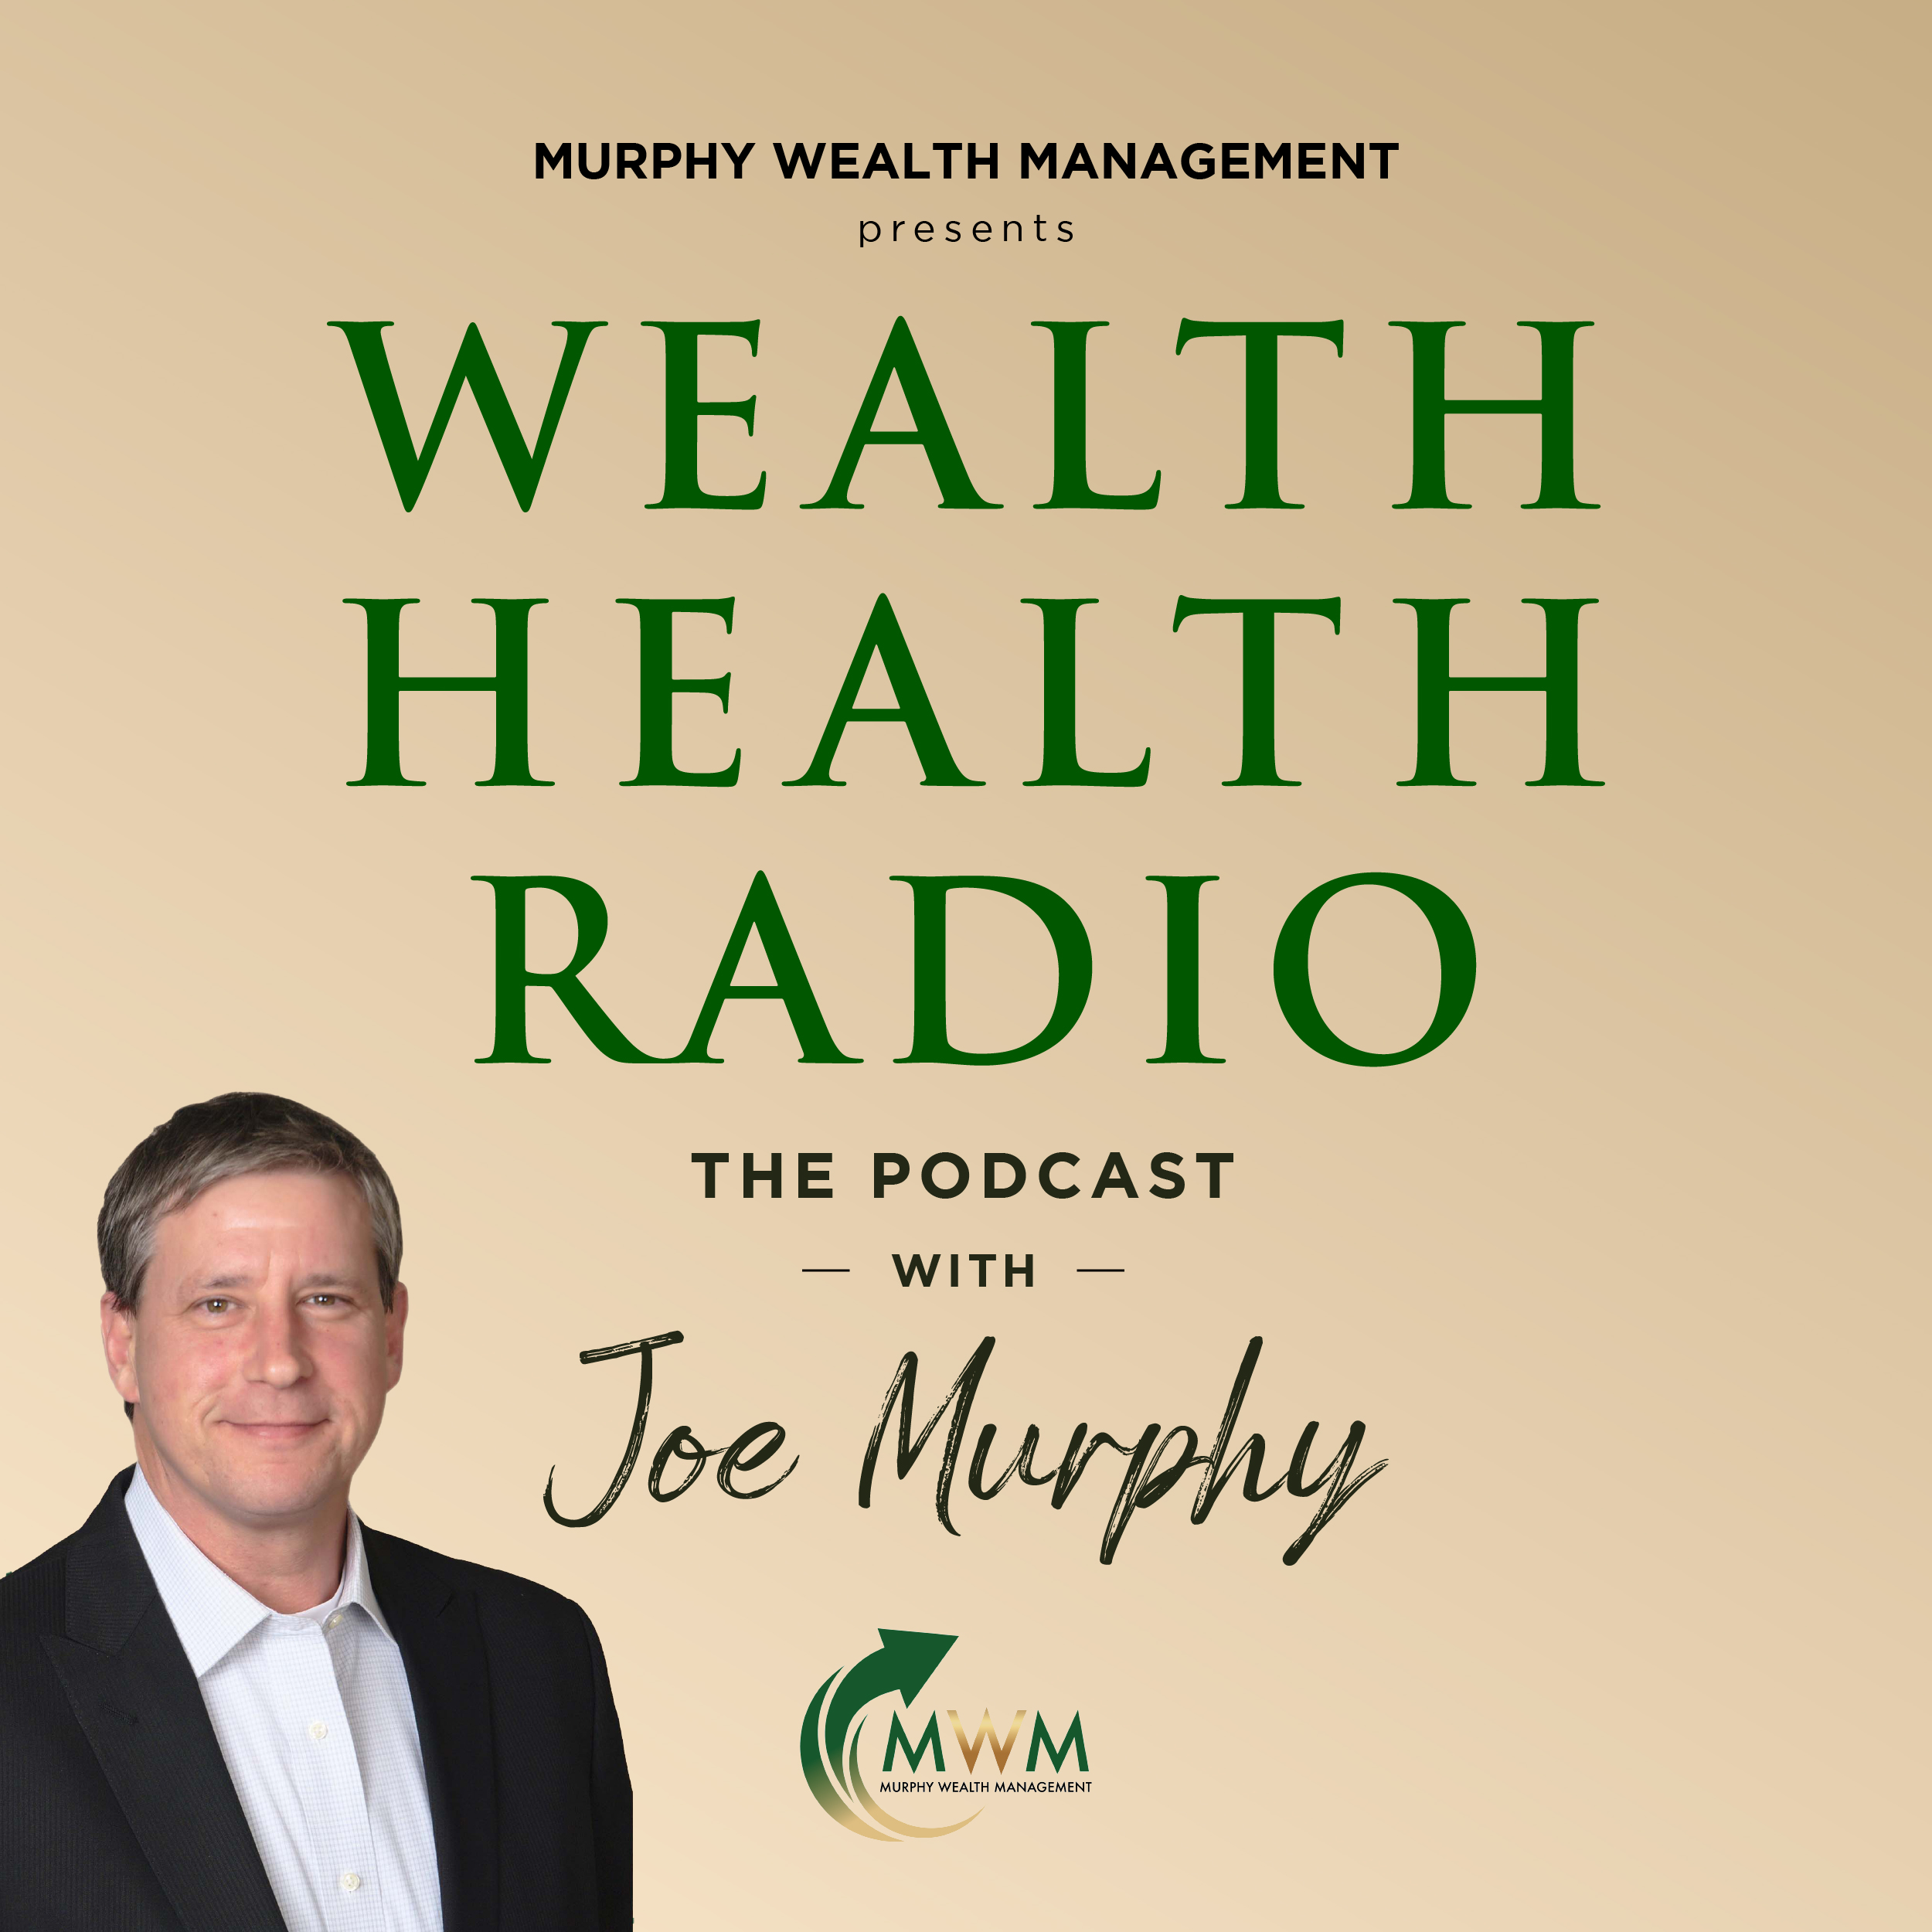 Wealth Health Radio Understanding your risk tolerance is important, particularly as you get closer to retirement. Joe Murphy breaks it down.